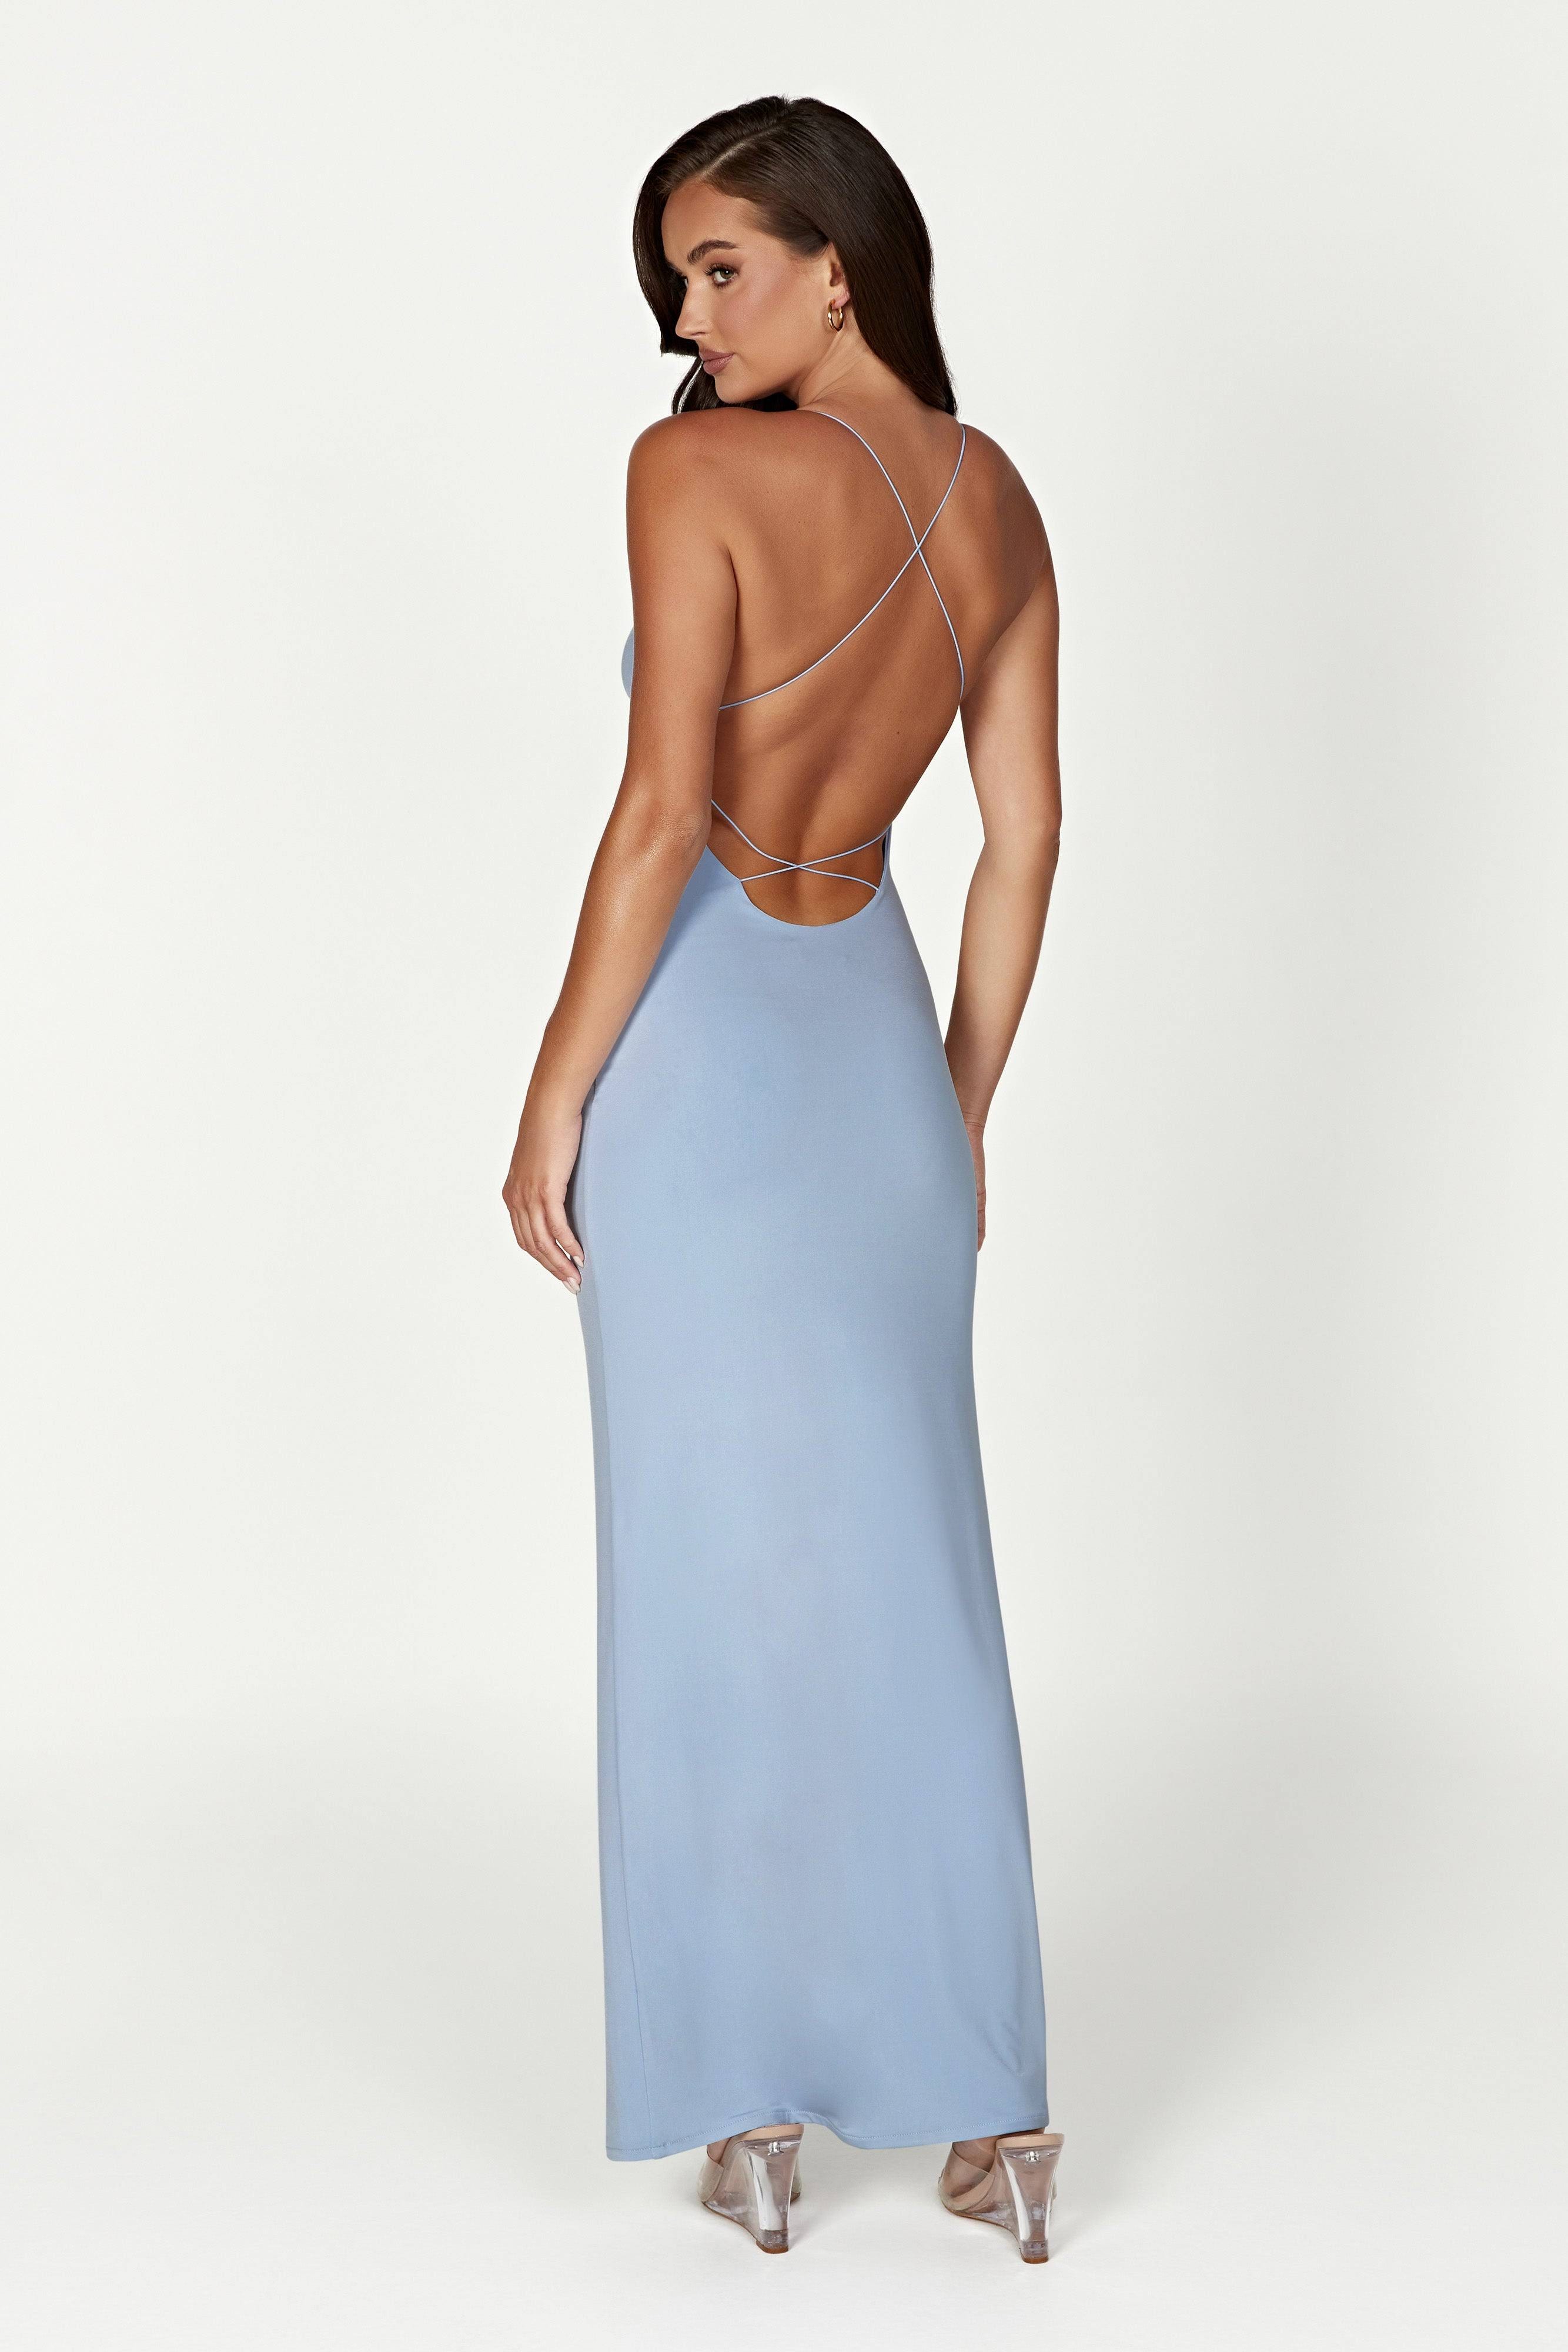 Stylish Powder Blue Maxi Dress with Twisted Bust Front Panel | Image